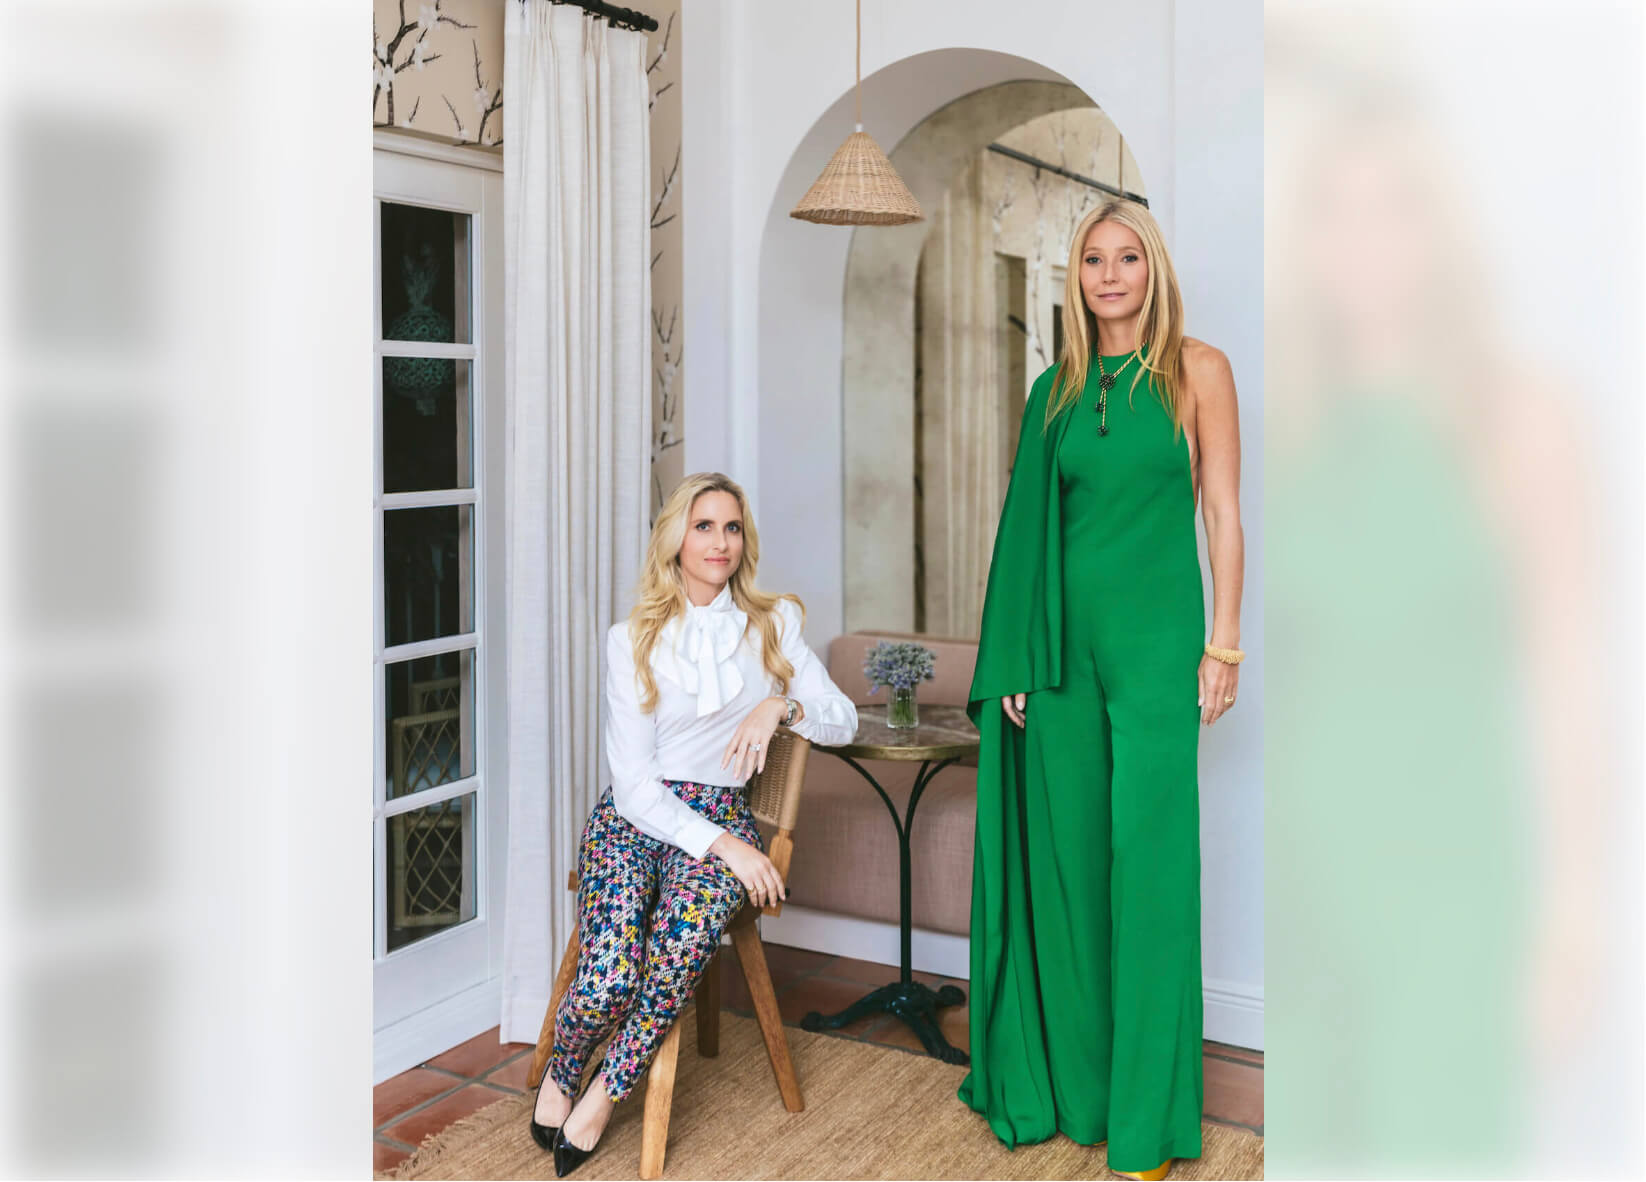 Gwyneth Paltrow and Sarah Wetenhall Celebrate goop’s 15th Anniversary and debut of the goop Villa at The Colony Hotel, Photo: Nick Mele